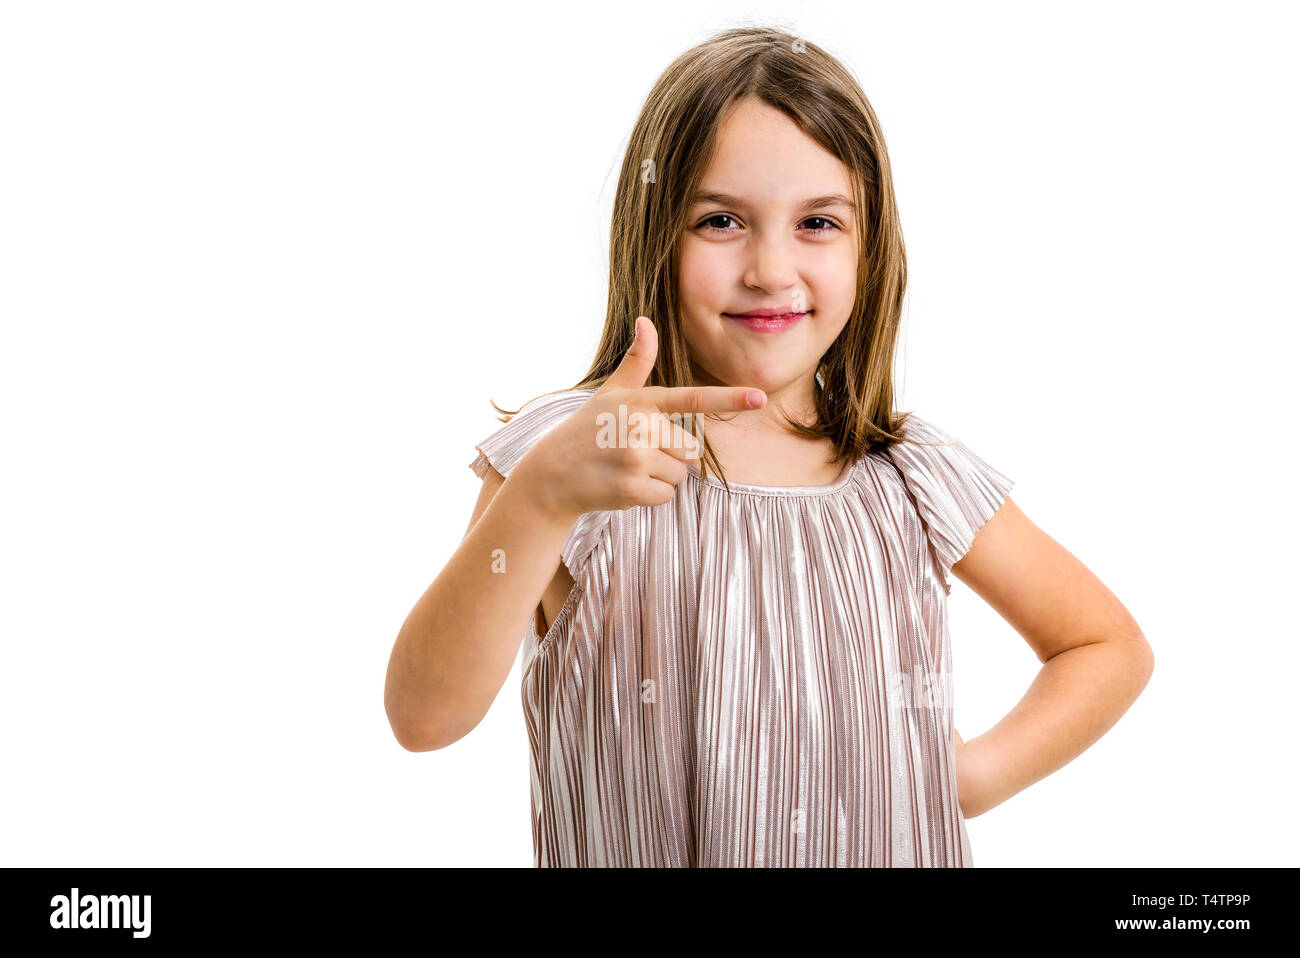 Portrait of happy girl pointing finger gun gesture at camera. Portrait of a cheerful cute little child girl looking at the camera, smiling and pointin Stock Photo